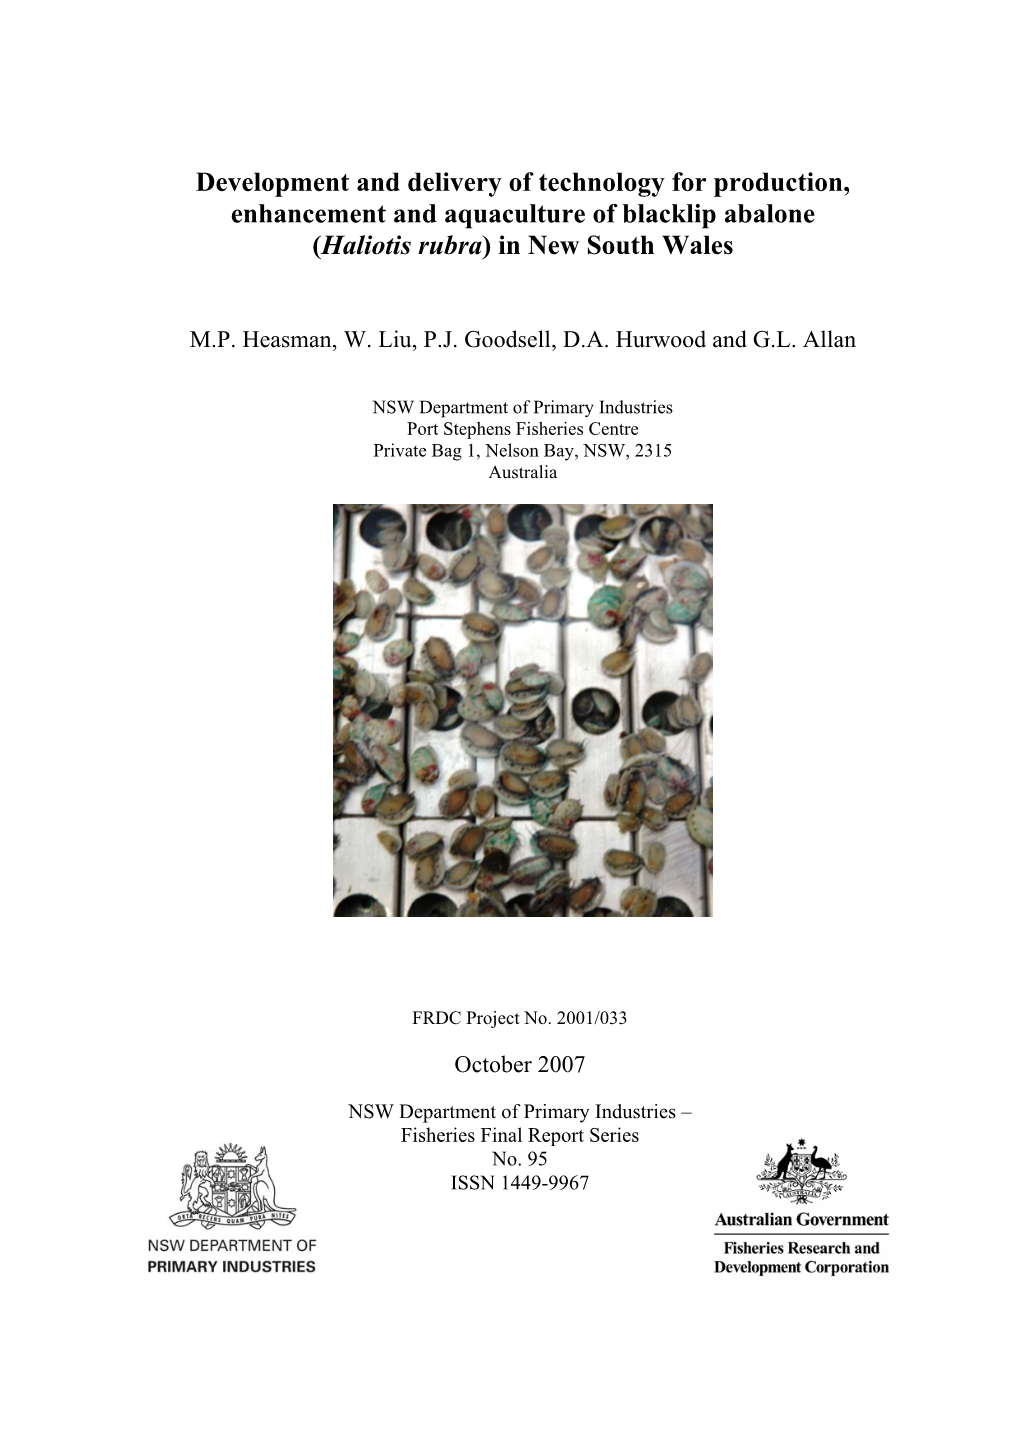 Development and Delivery of Technology for Production, Enhancement and Aquaculture of Blacklip Abalone (Haliotis Rubra) in New South Wales